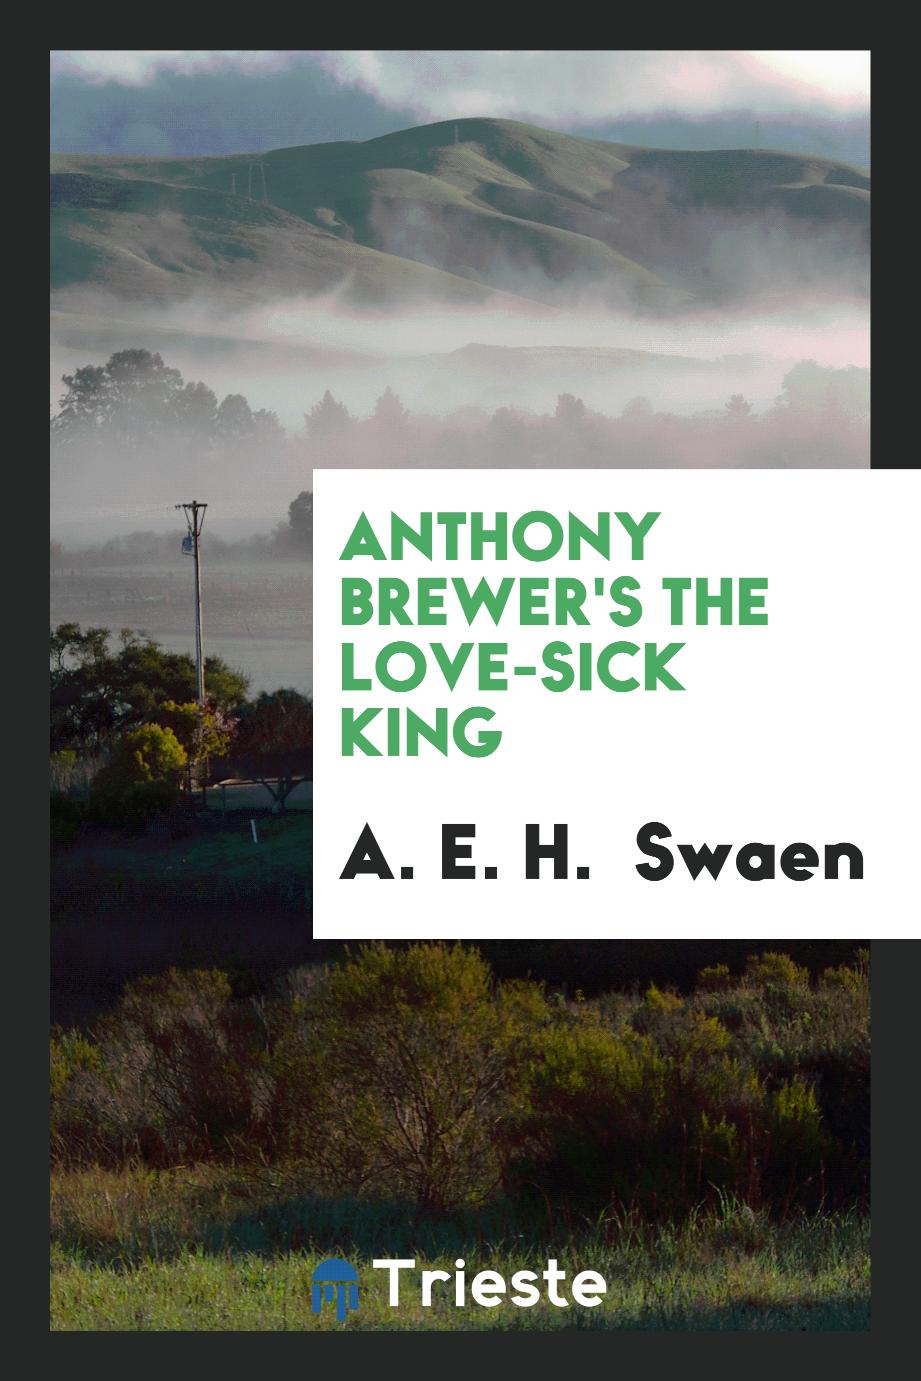 Anthony Brewer's The Love-sick King